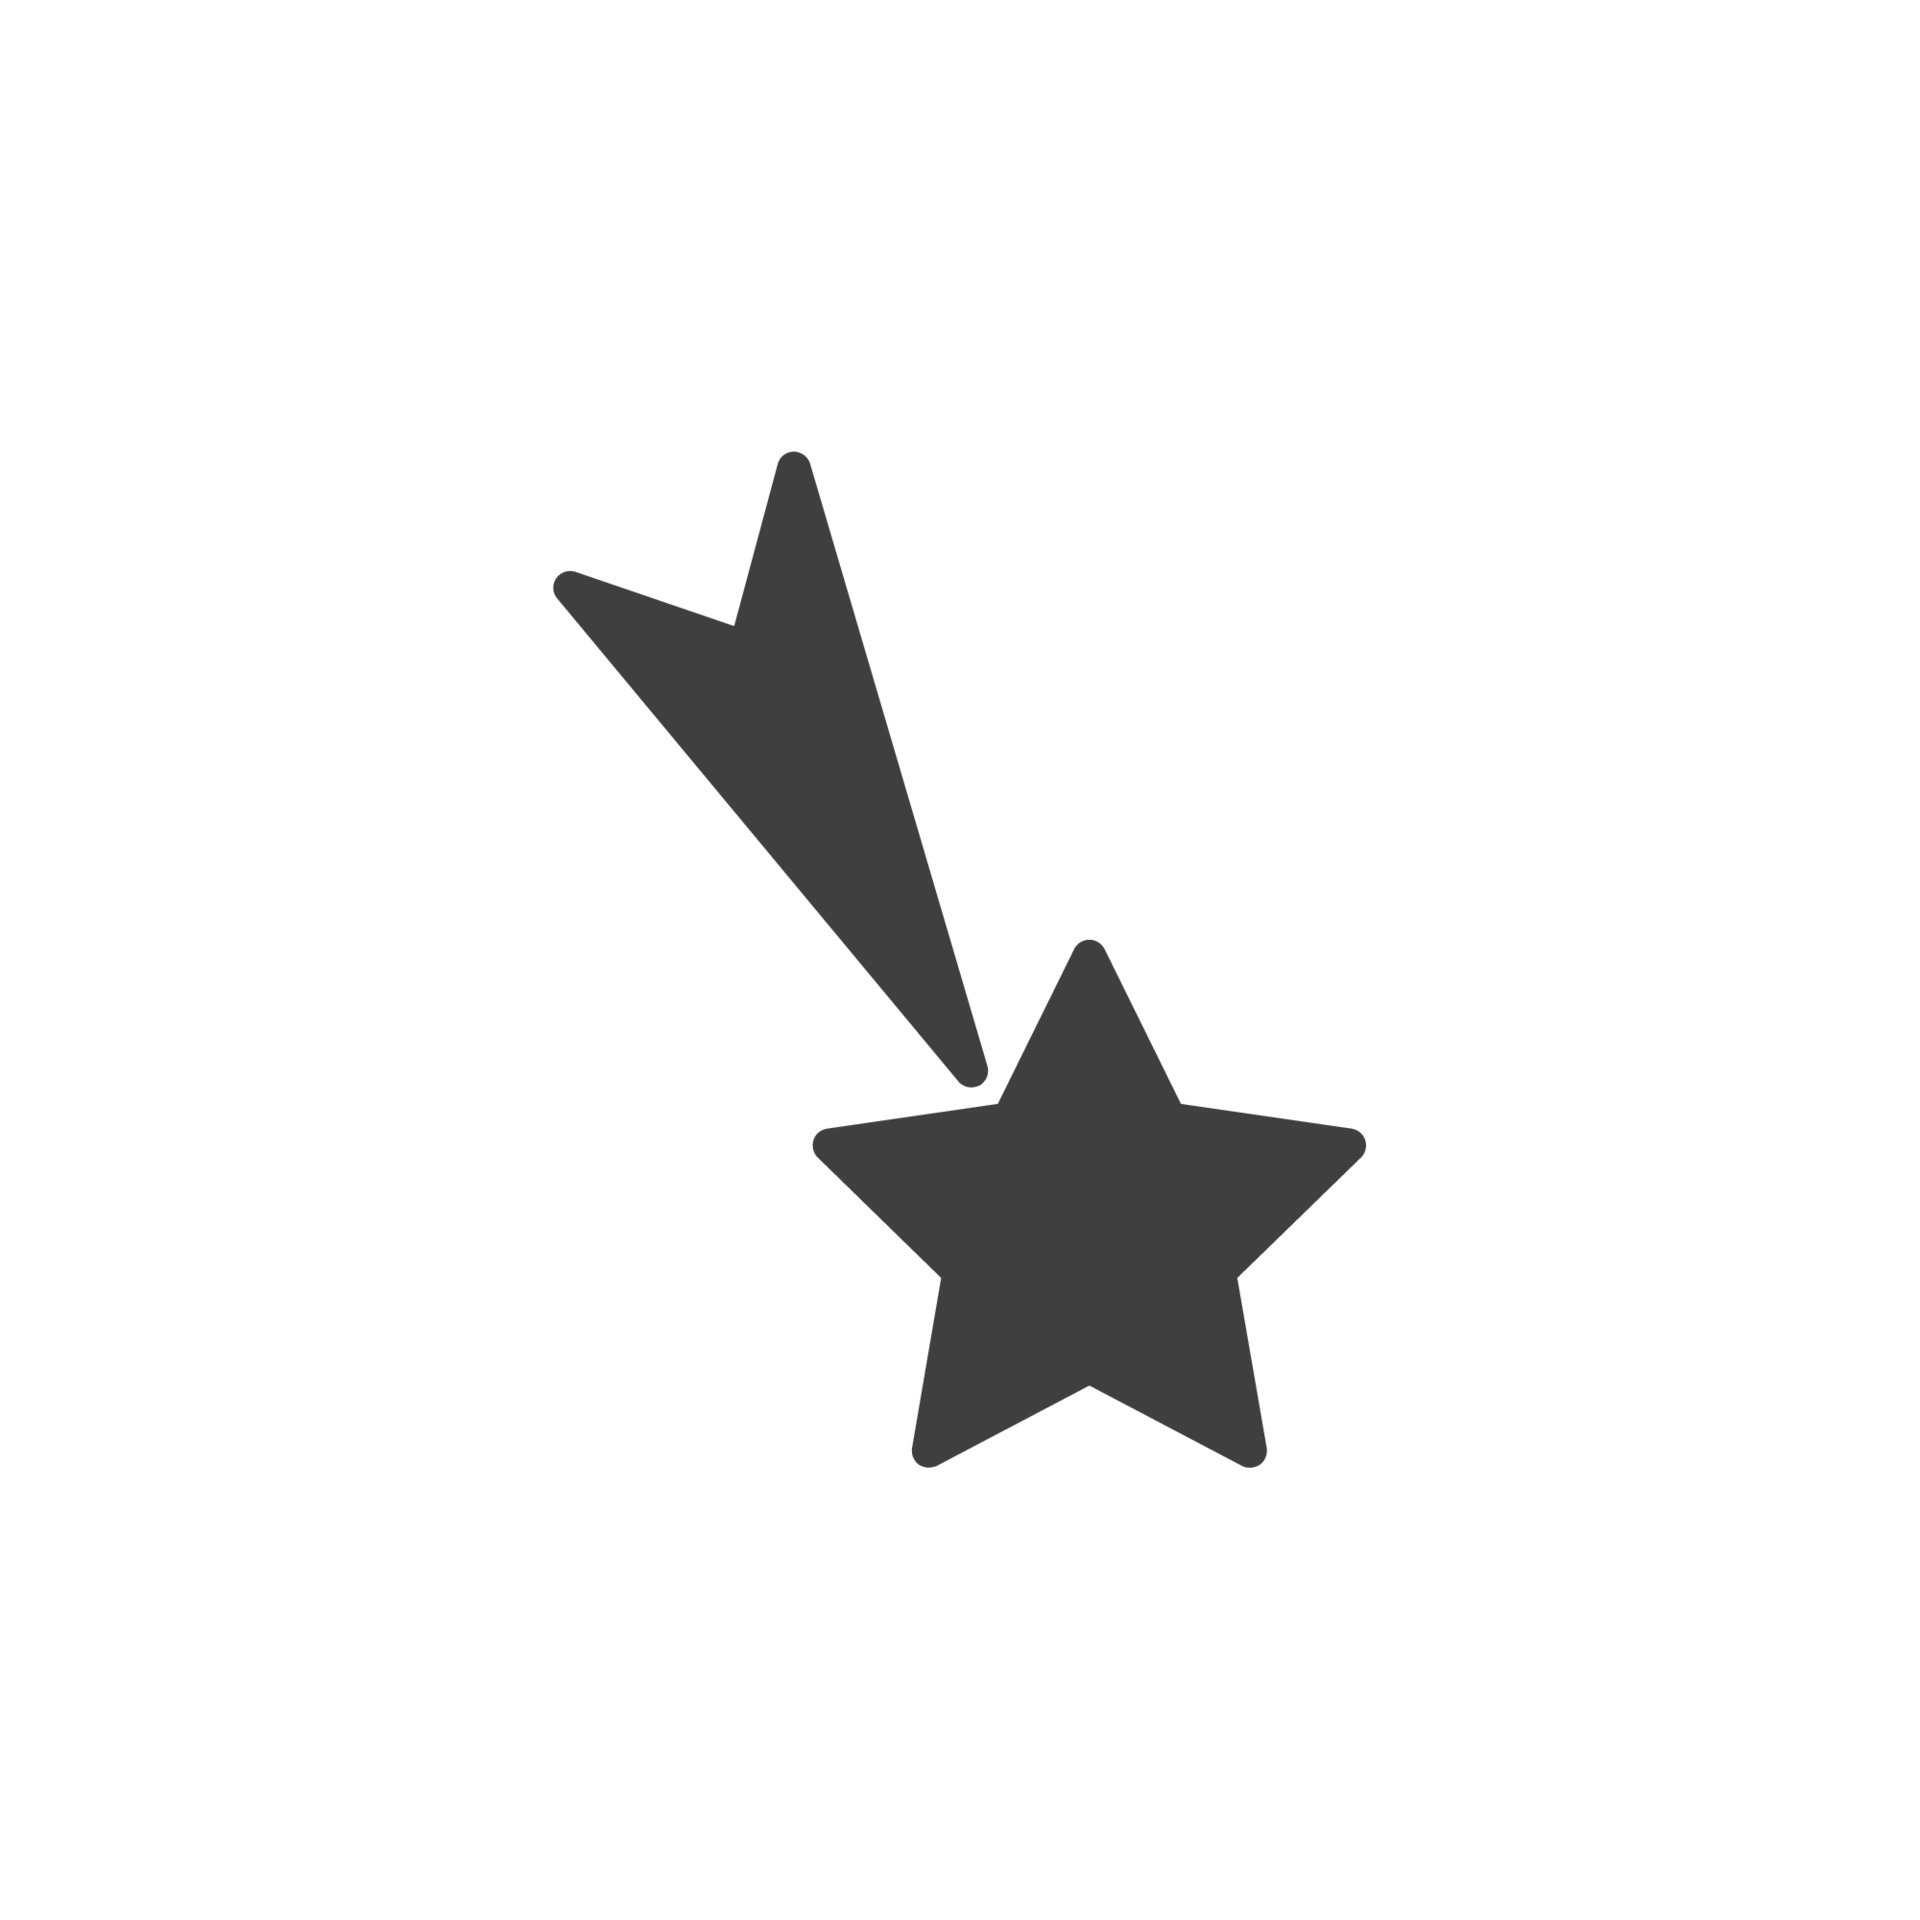 The icon-star-half should be a complete star with half filling